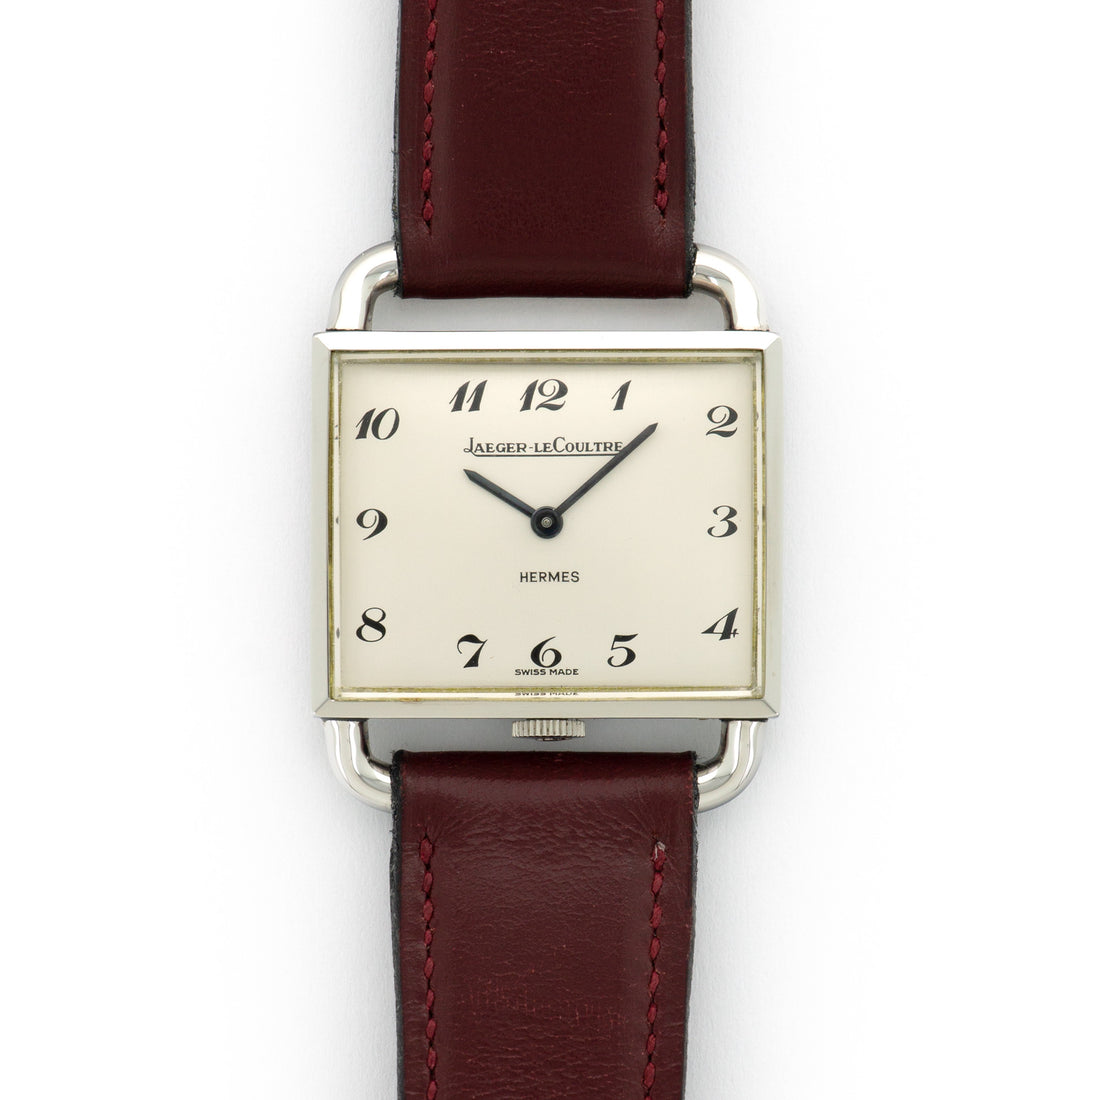 Jaeger Lecoultre for Hermes Drivers Watch